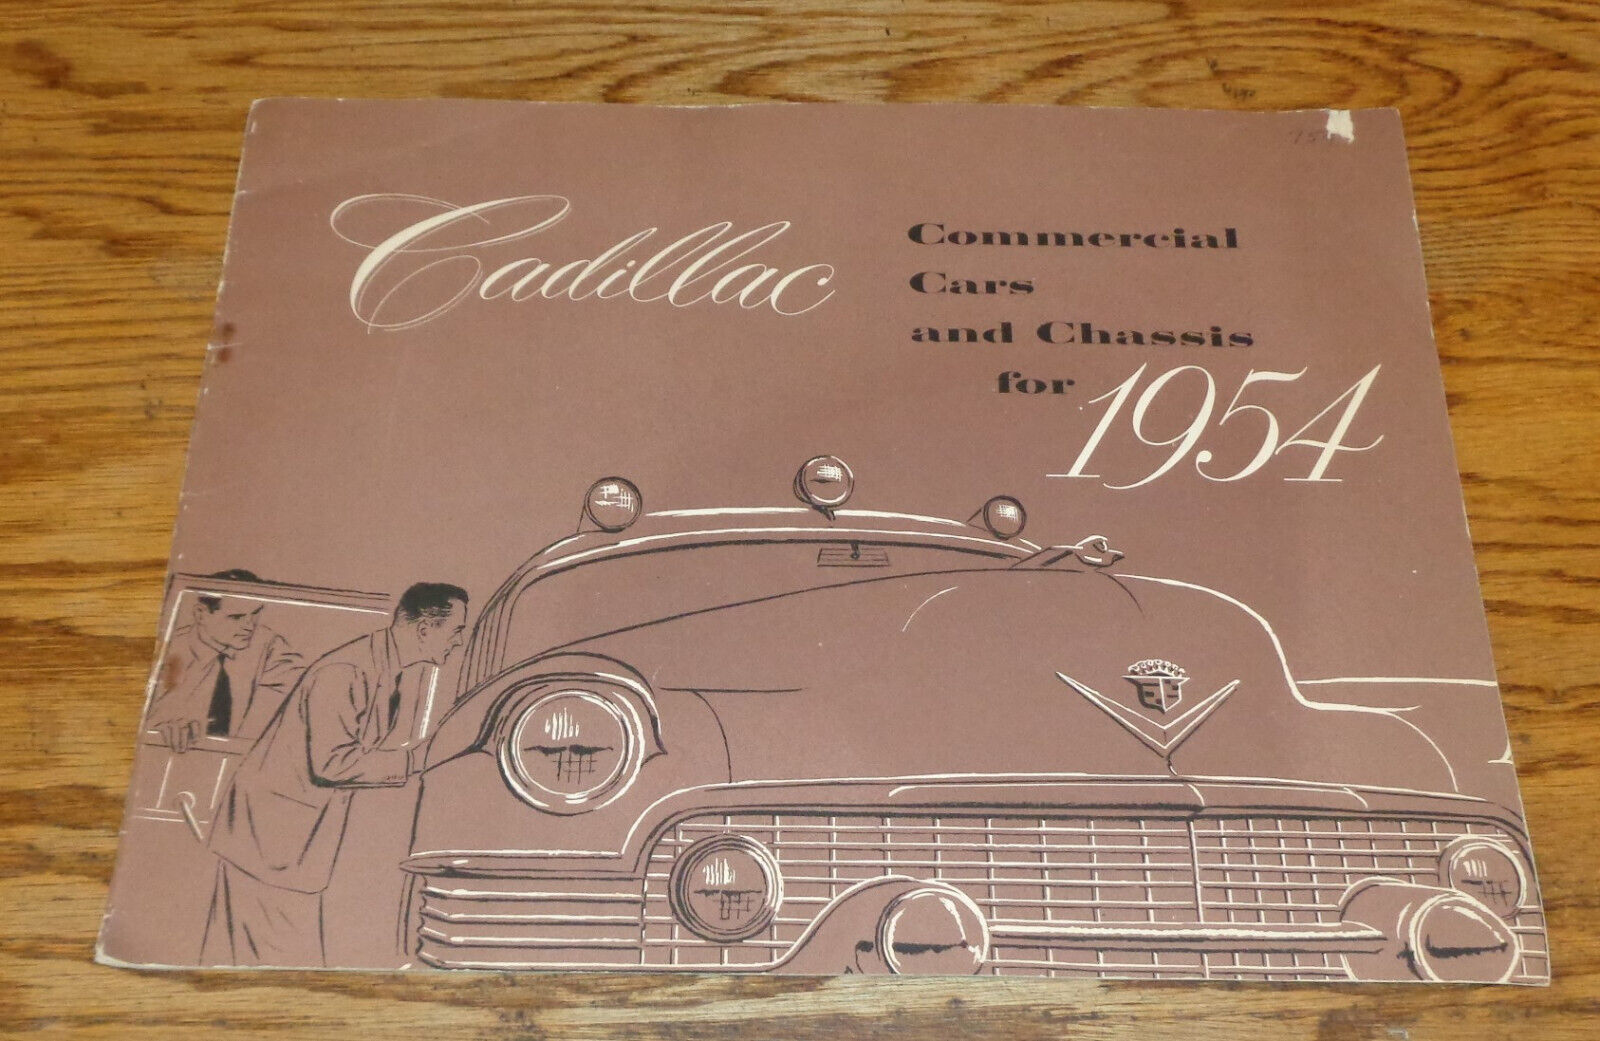 Original 1954 Cadillac Commercial Car & Chassis Deluxe Sales Brochure 54